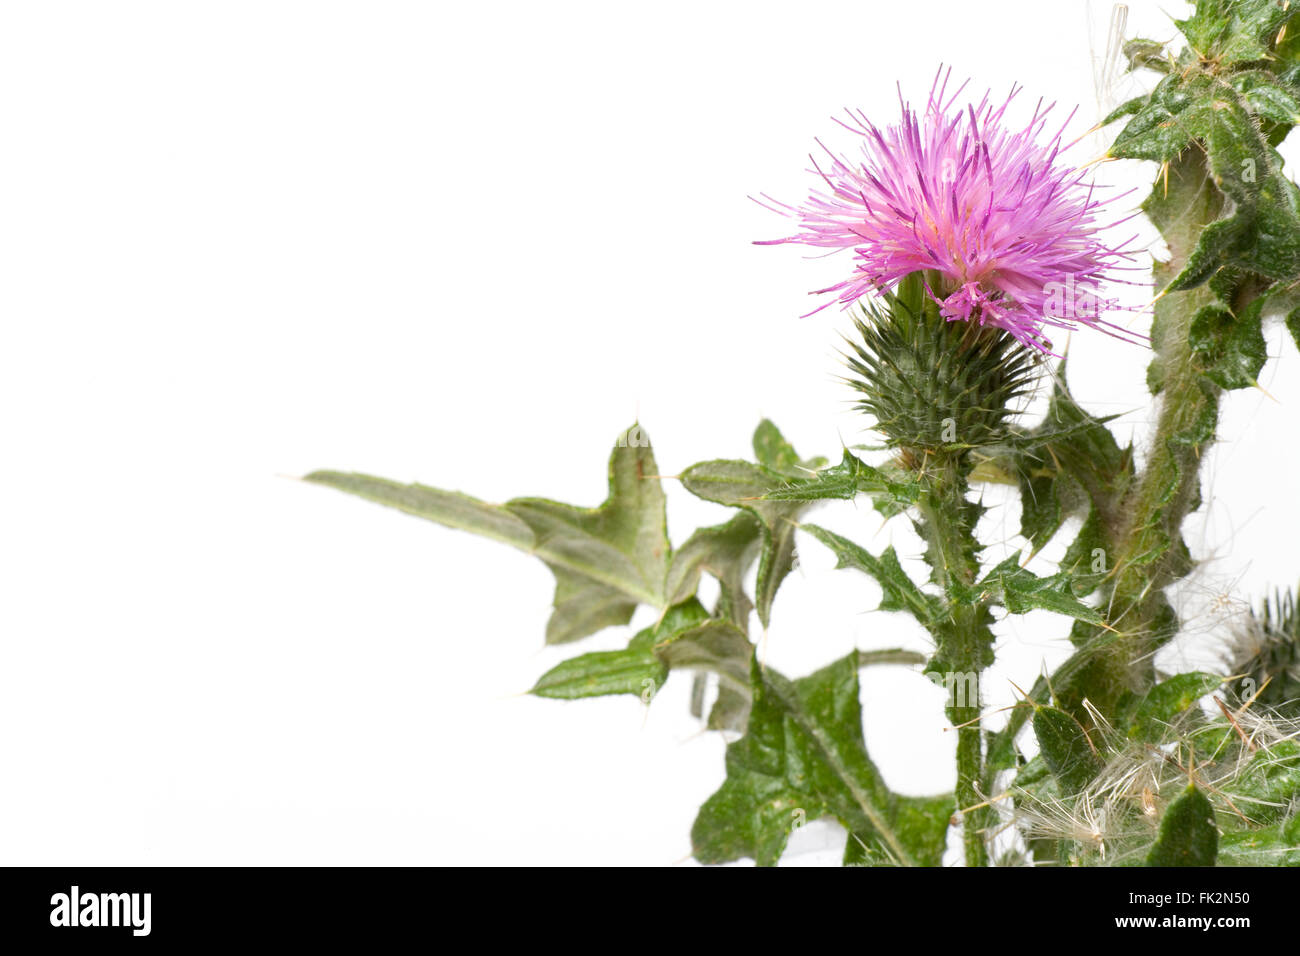 Scotch Thistle With Purple Flower On White Background with room for text Stock Photo